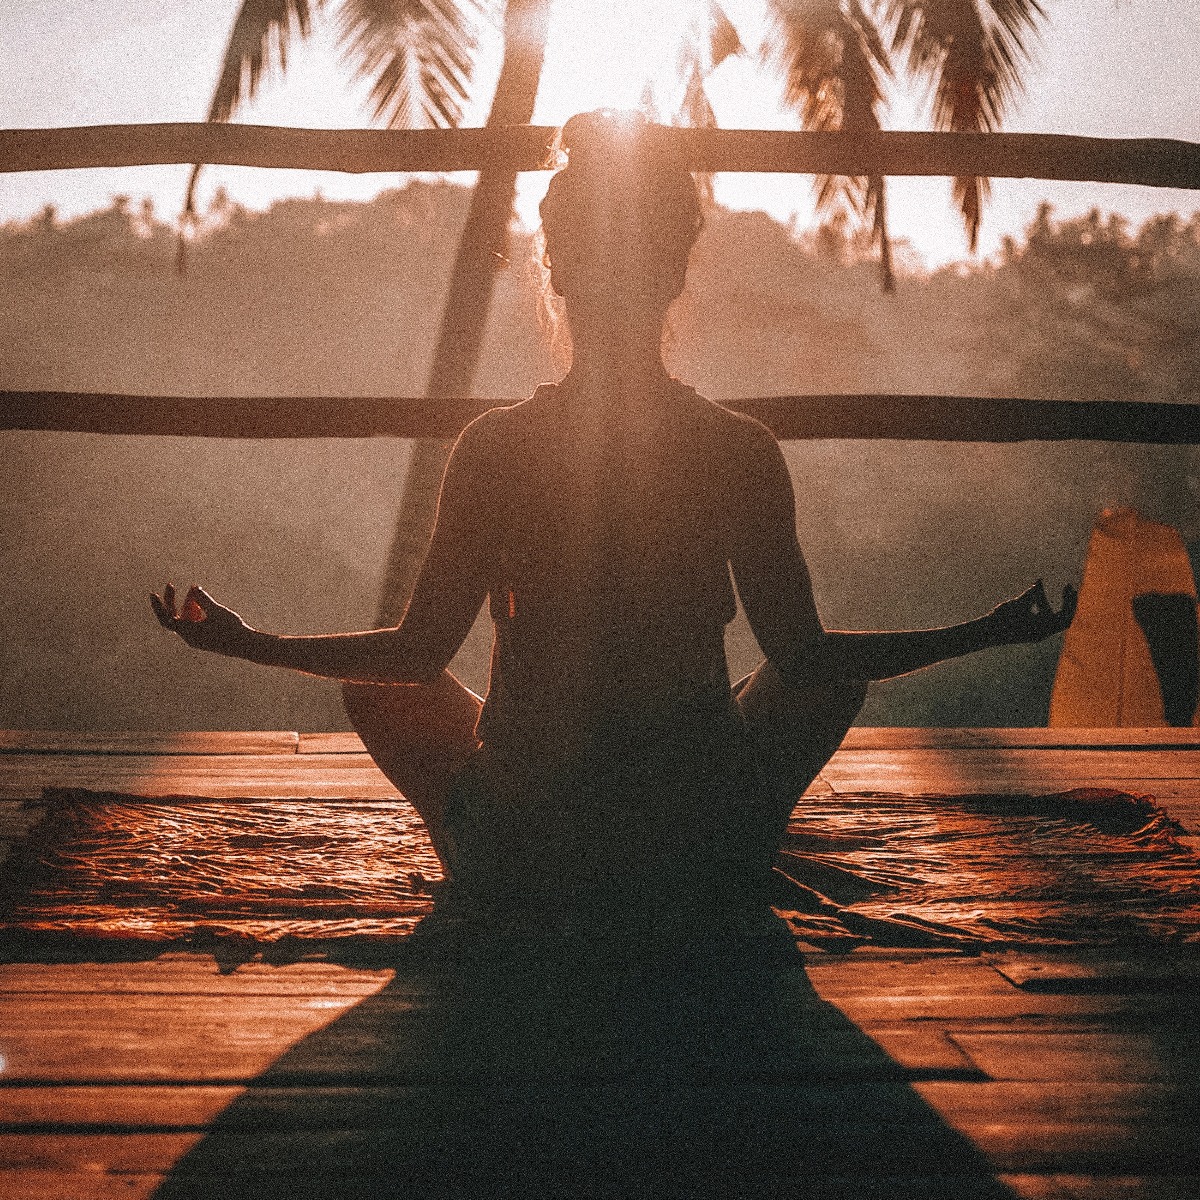 The healing powers of meditation